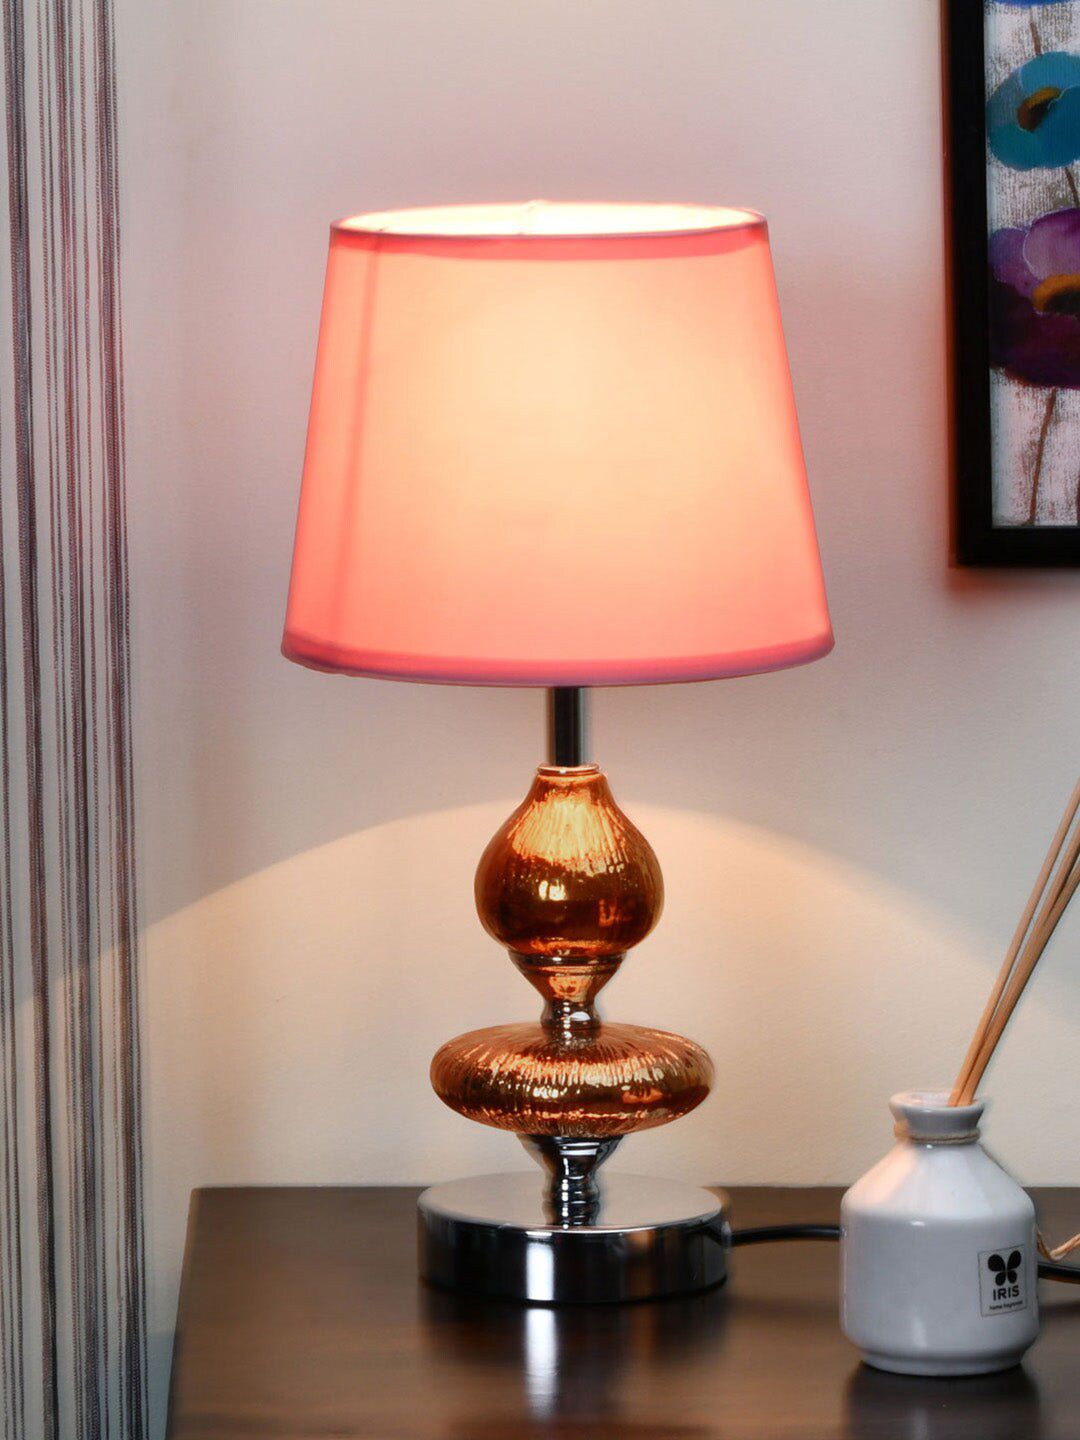 Athome by Nilkamal Pink Ceramic Table Lamp Price in India